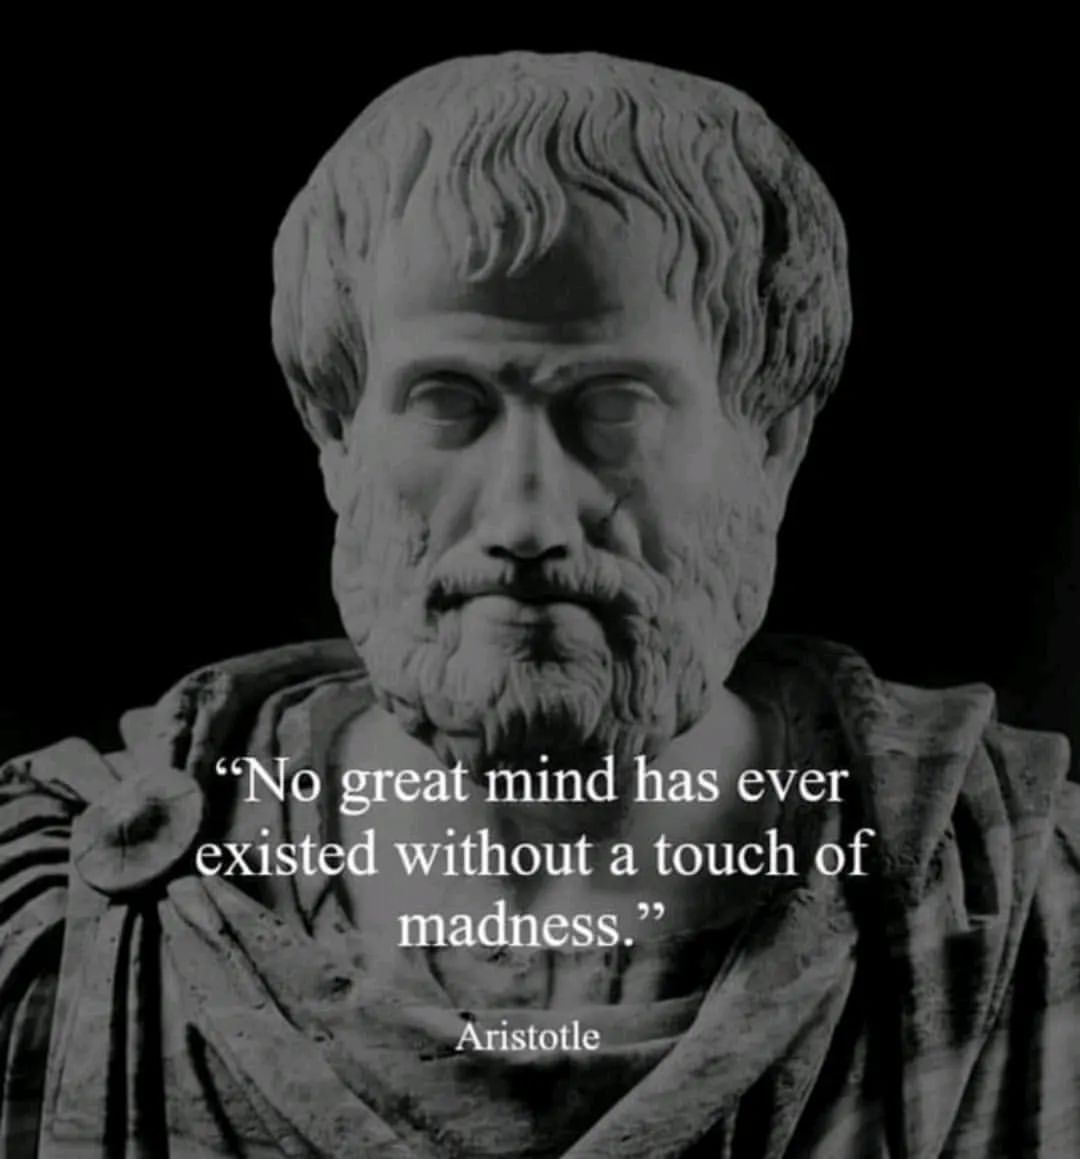 "No great mind has ever existed without a touch of madness." Aristotle.